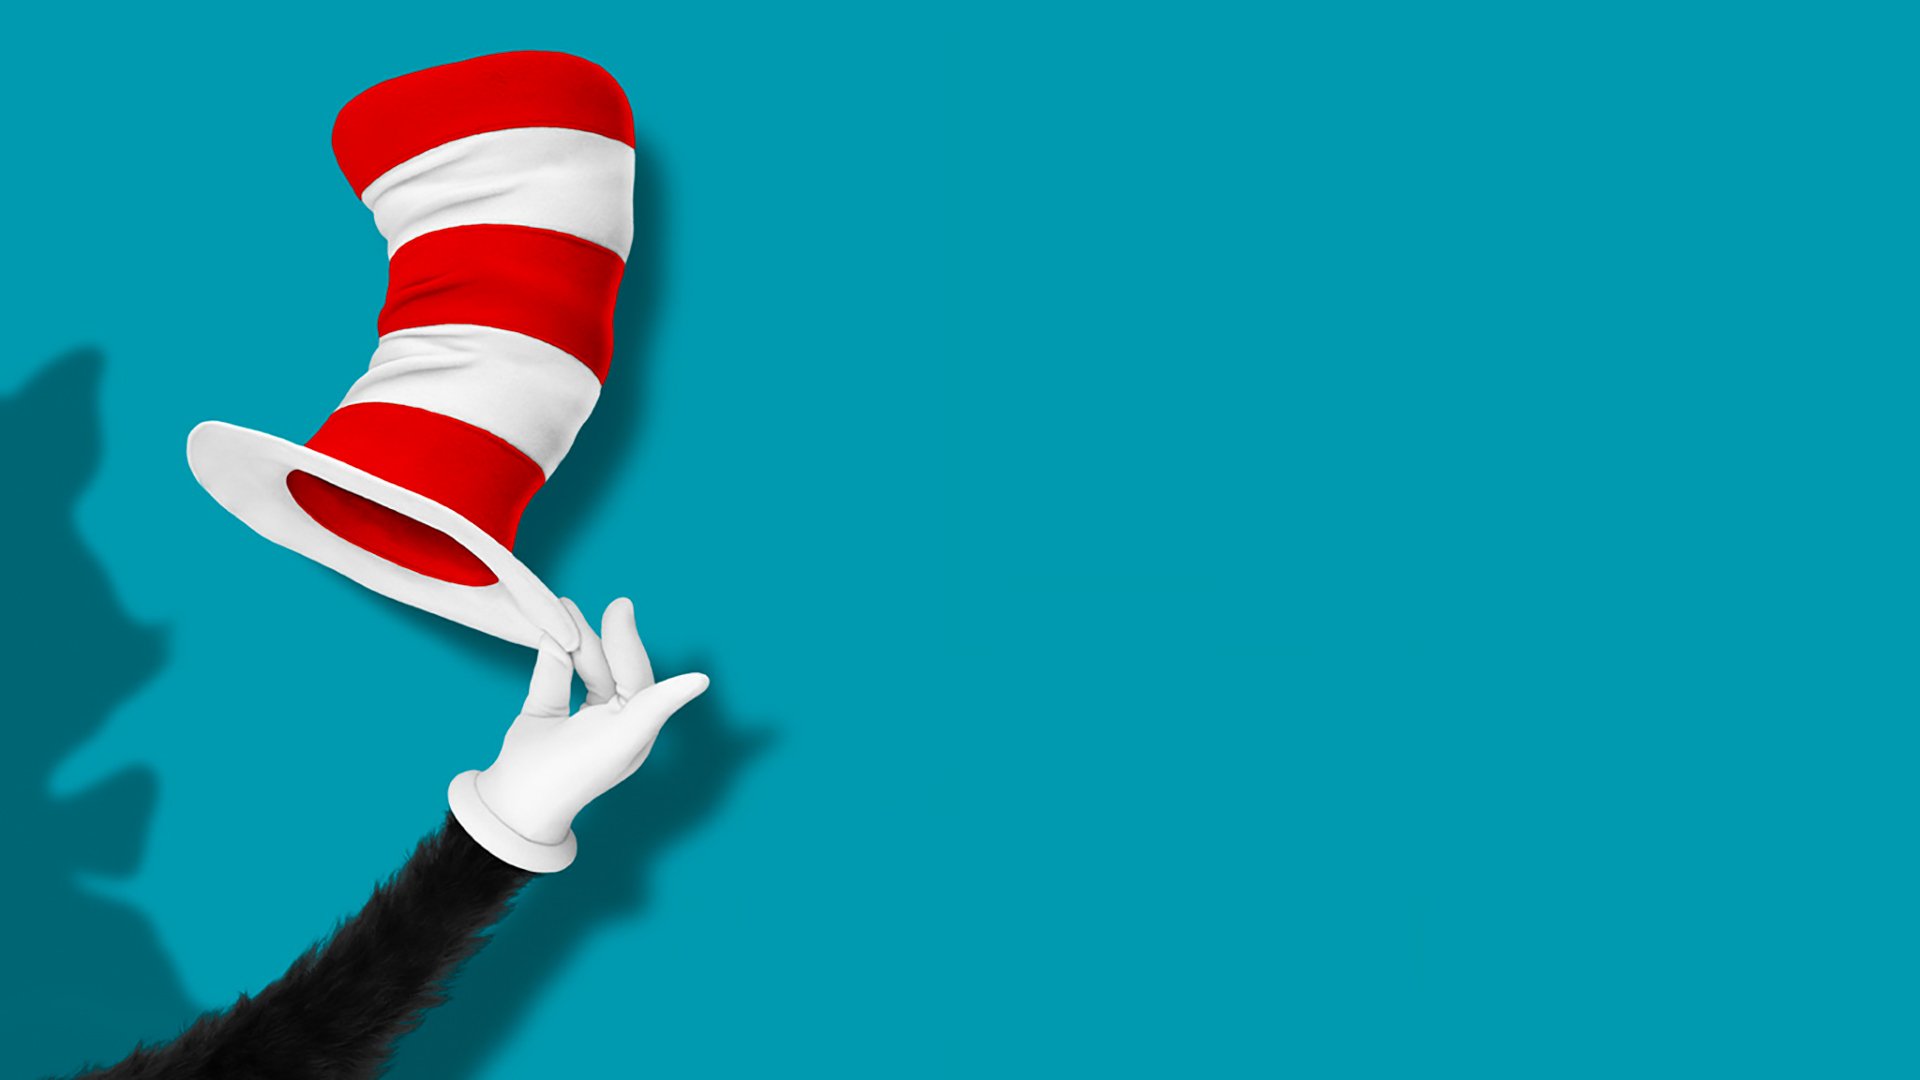 HD wallpaper The Cat In The Hat Dr Seuss cats The Lorax  Wallpaper  Flare